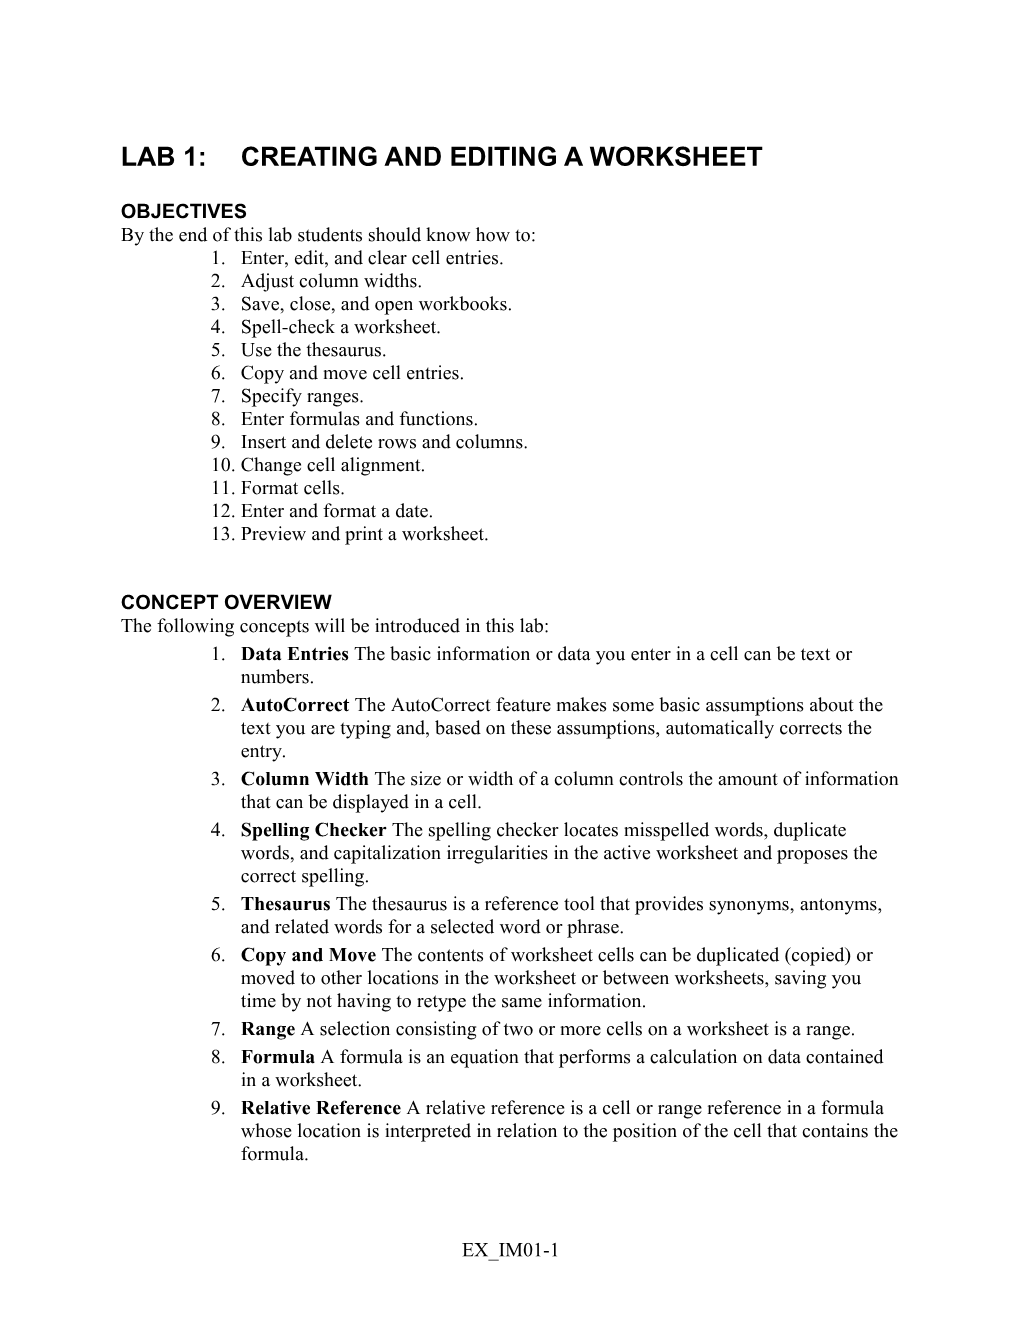 Lab 1: Creating and Editing a Worksheet